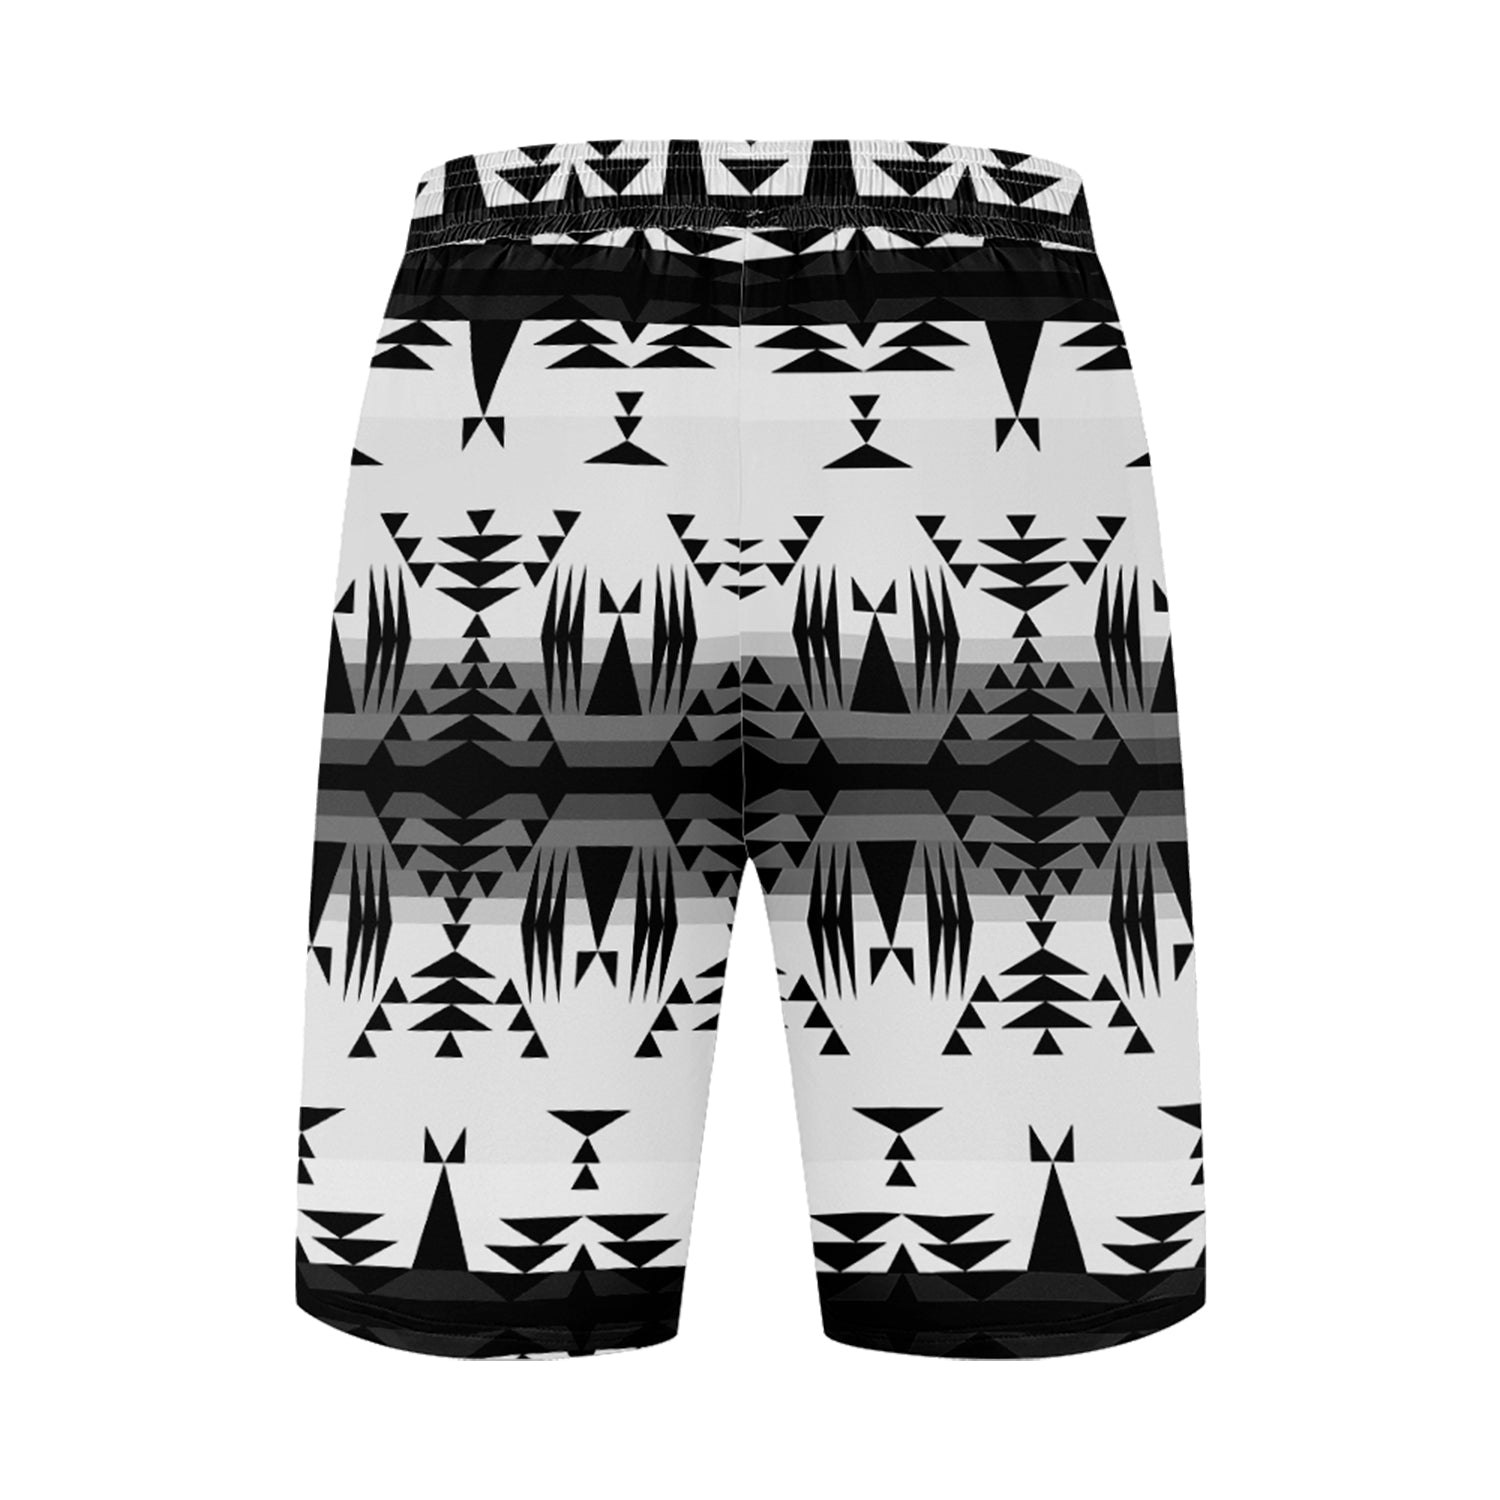 Between the Mountains White and Black Athletic Shorts with Pockets